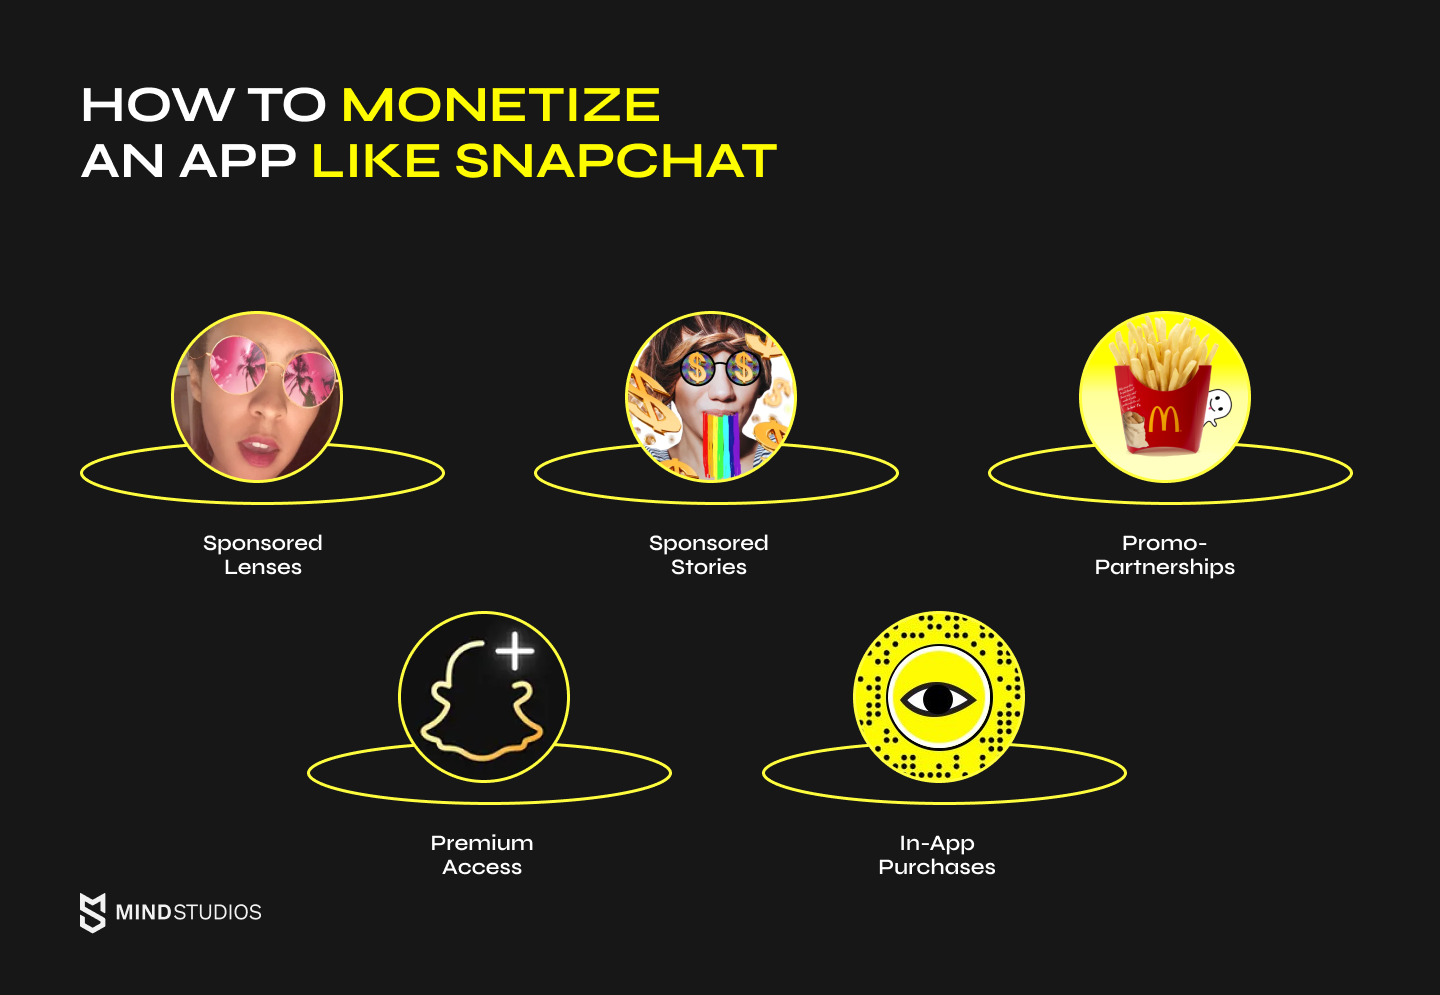 How to monetize an app like Snapchat